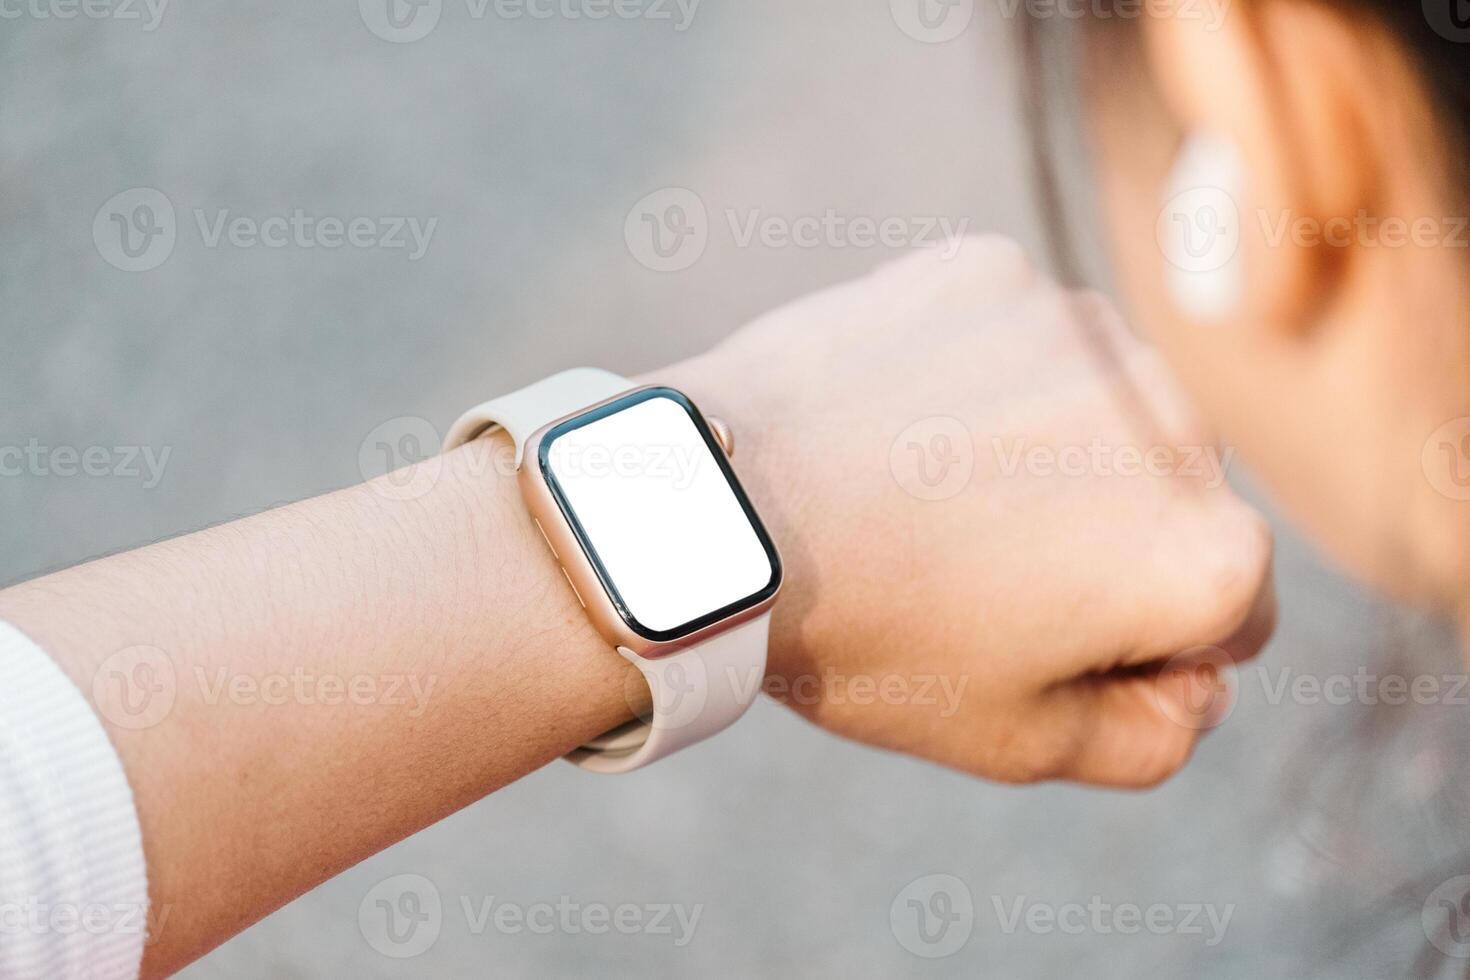 Close-up of a person wrist wearing a modern smartwatch with a blank screen, indicating connectivity and technology in everyday life. photo